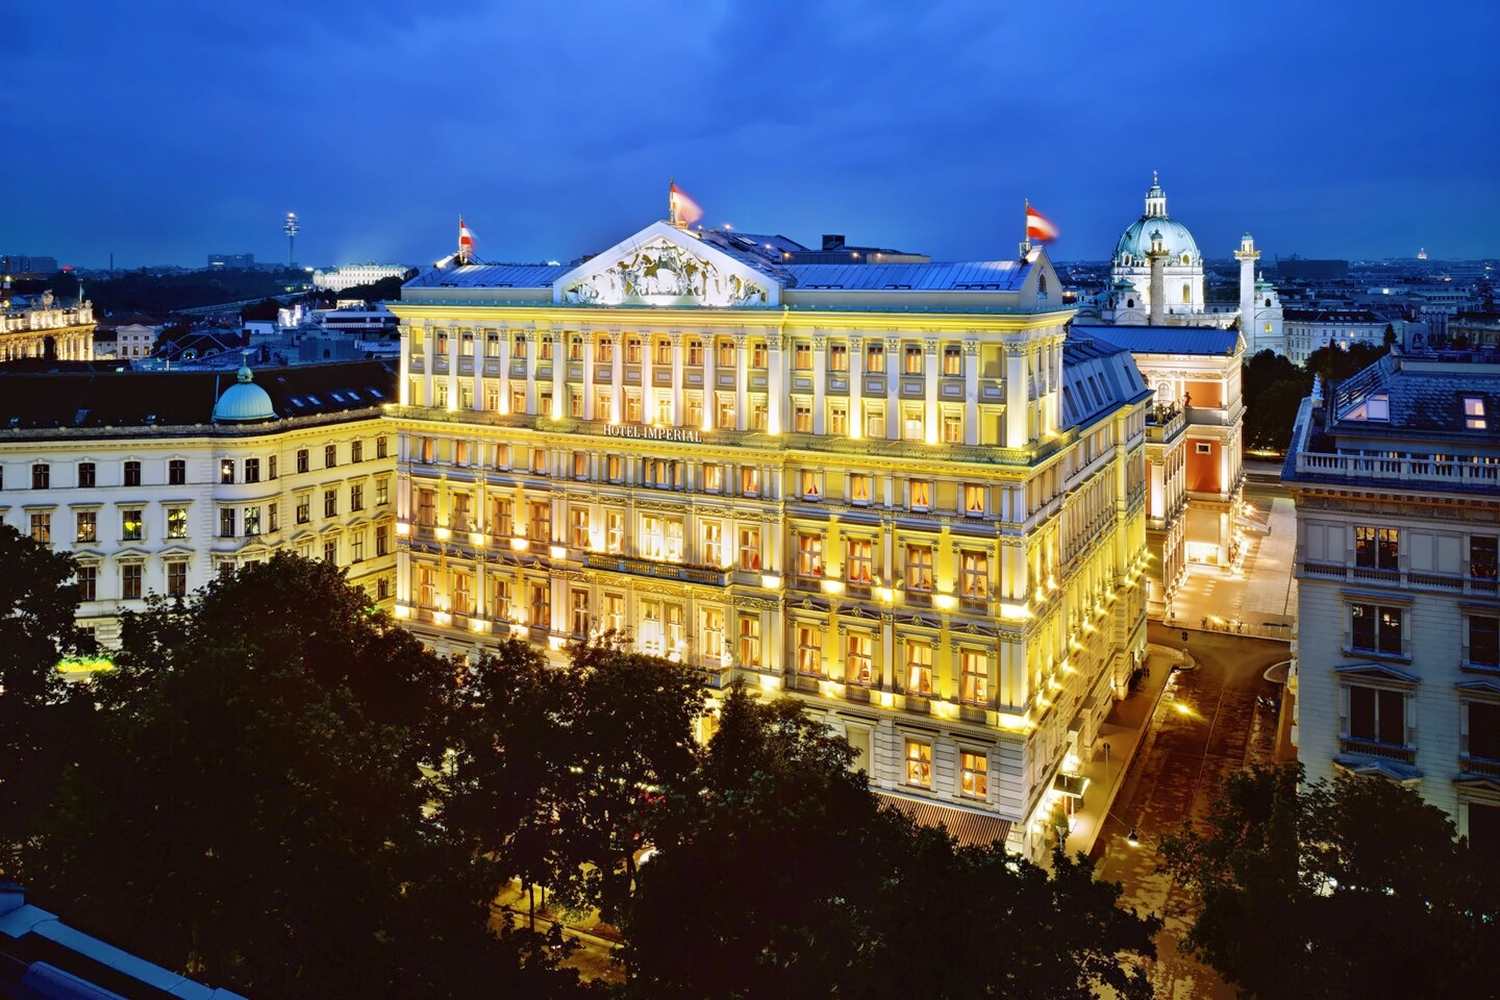 Planning a Vacation in Vienna? Here Are the Best Hotels in the City - 5 Star Luxury Hotel Community - PrivateUpgrades